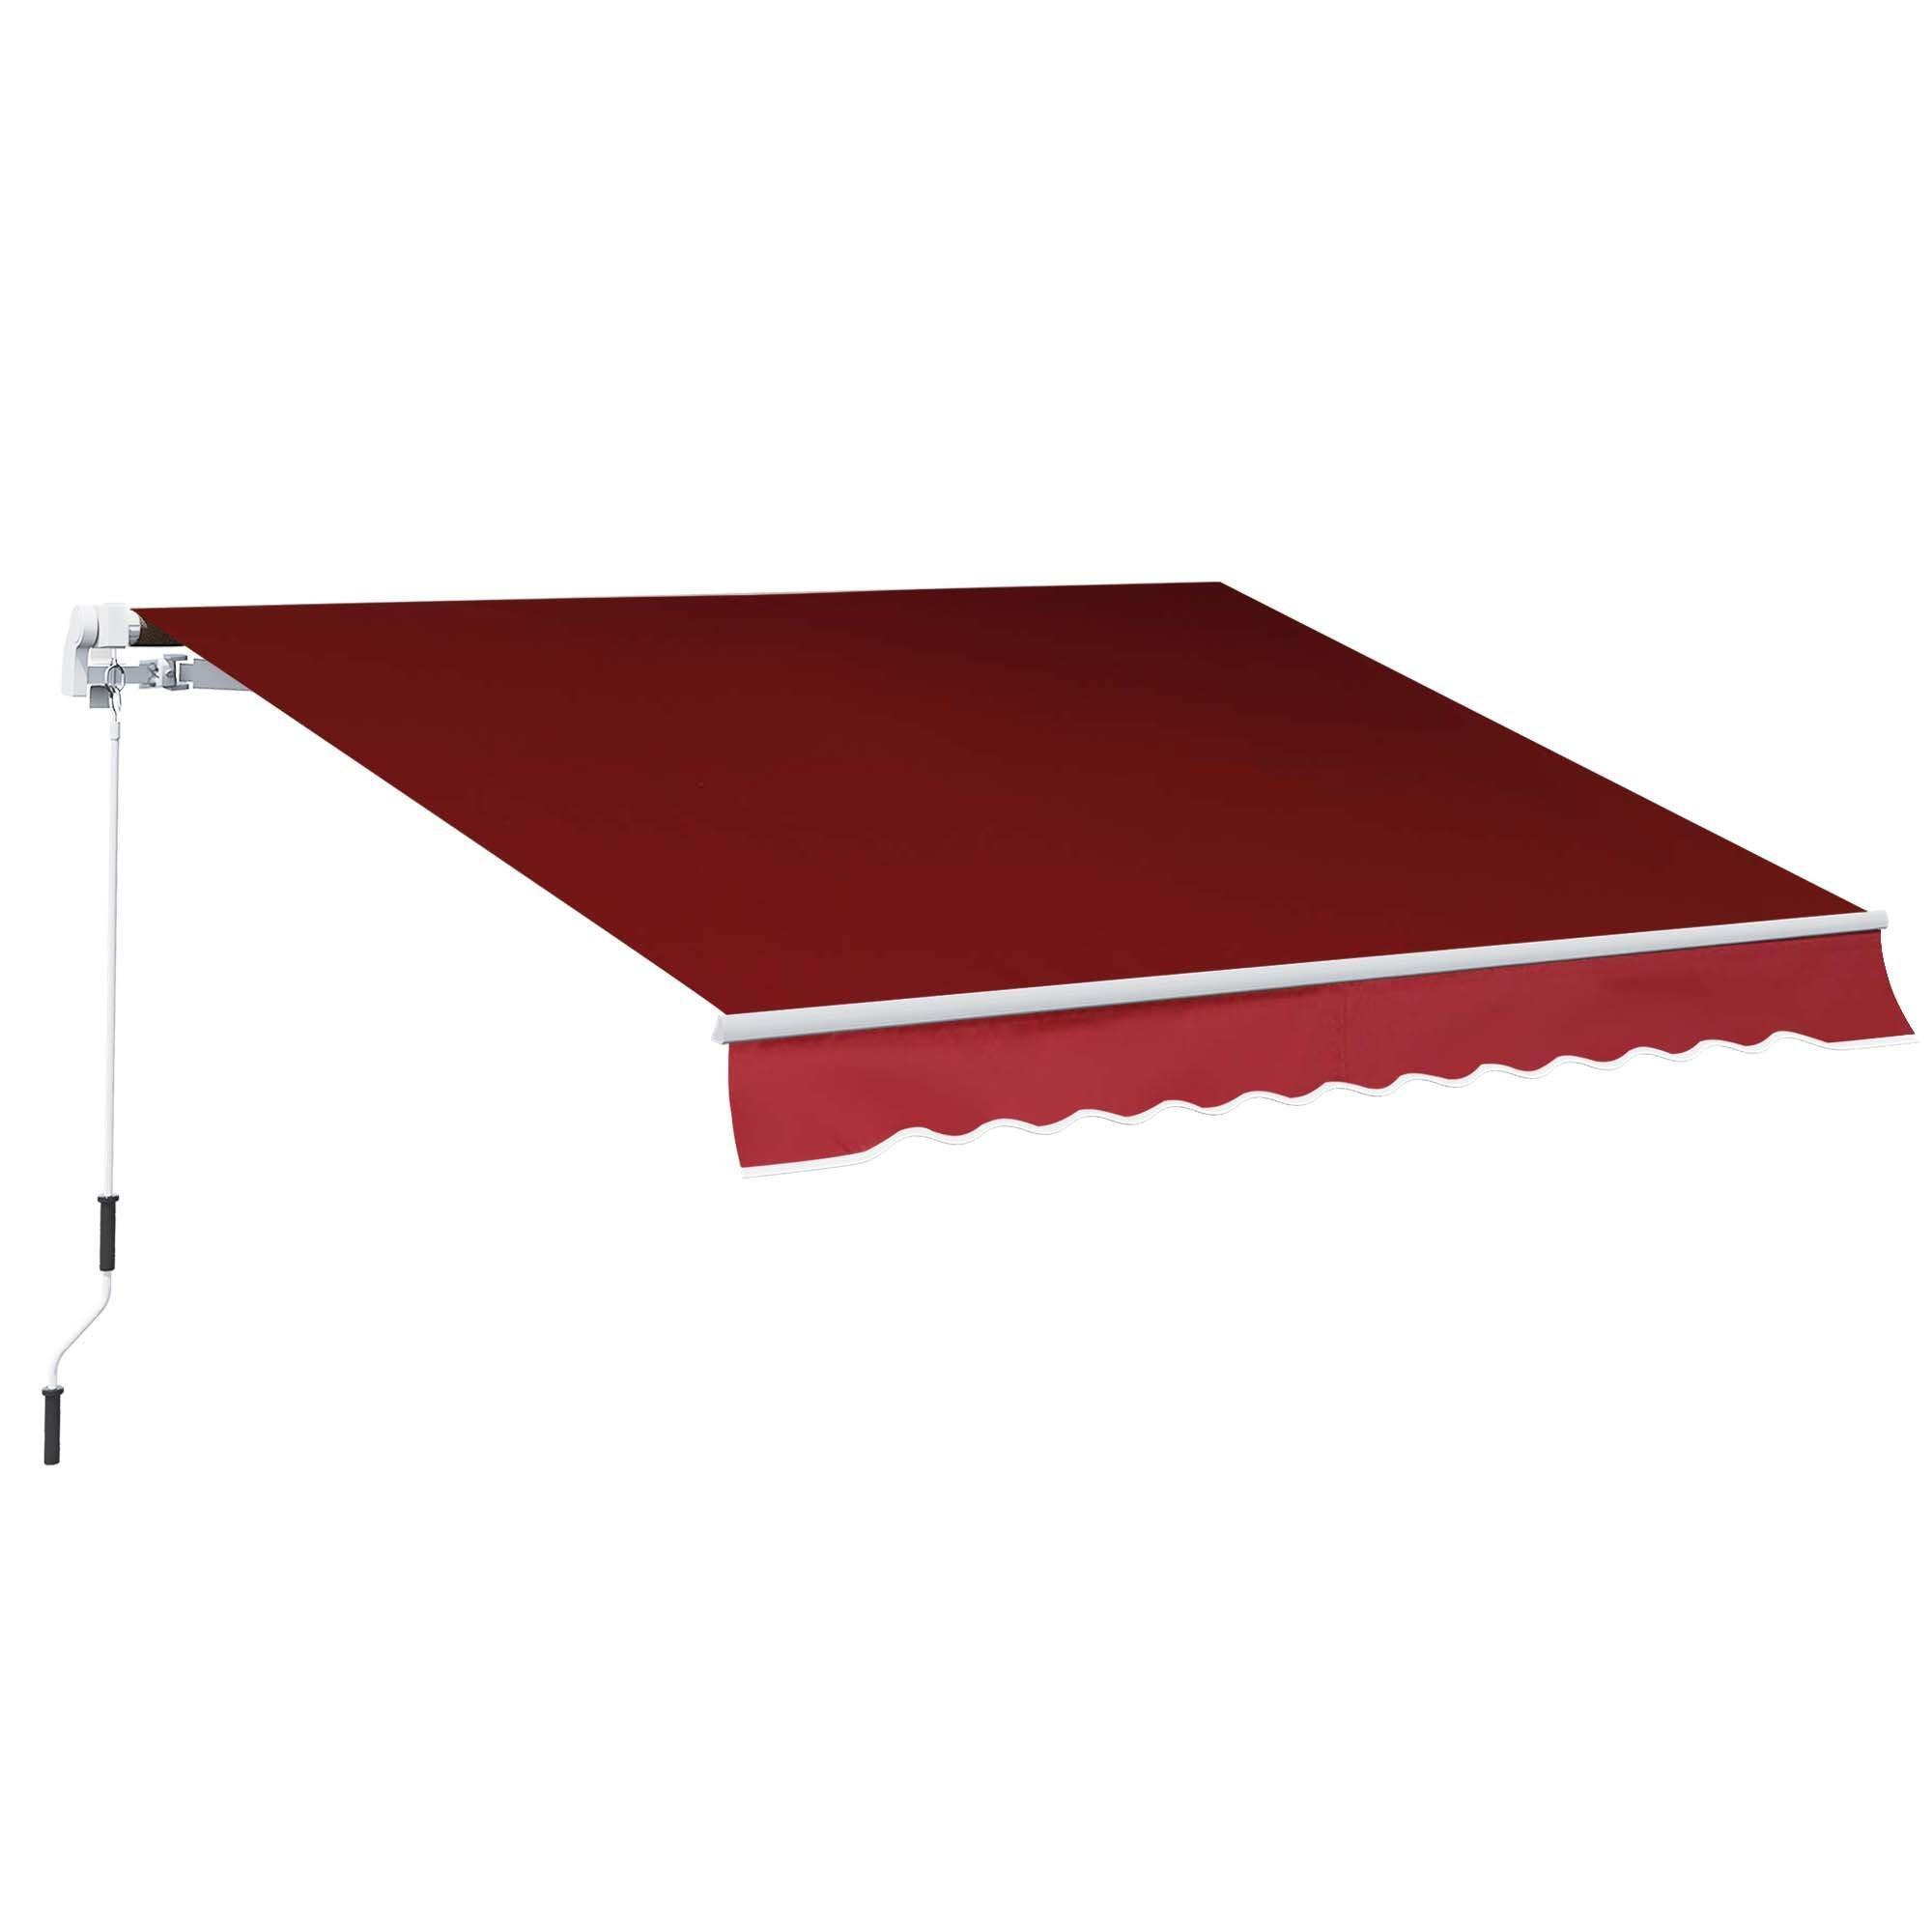 2.5m x 2m Garden Patio Manual Awning Canopy with Winding Handle - image 1